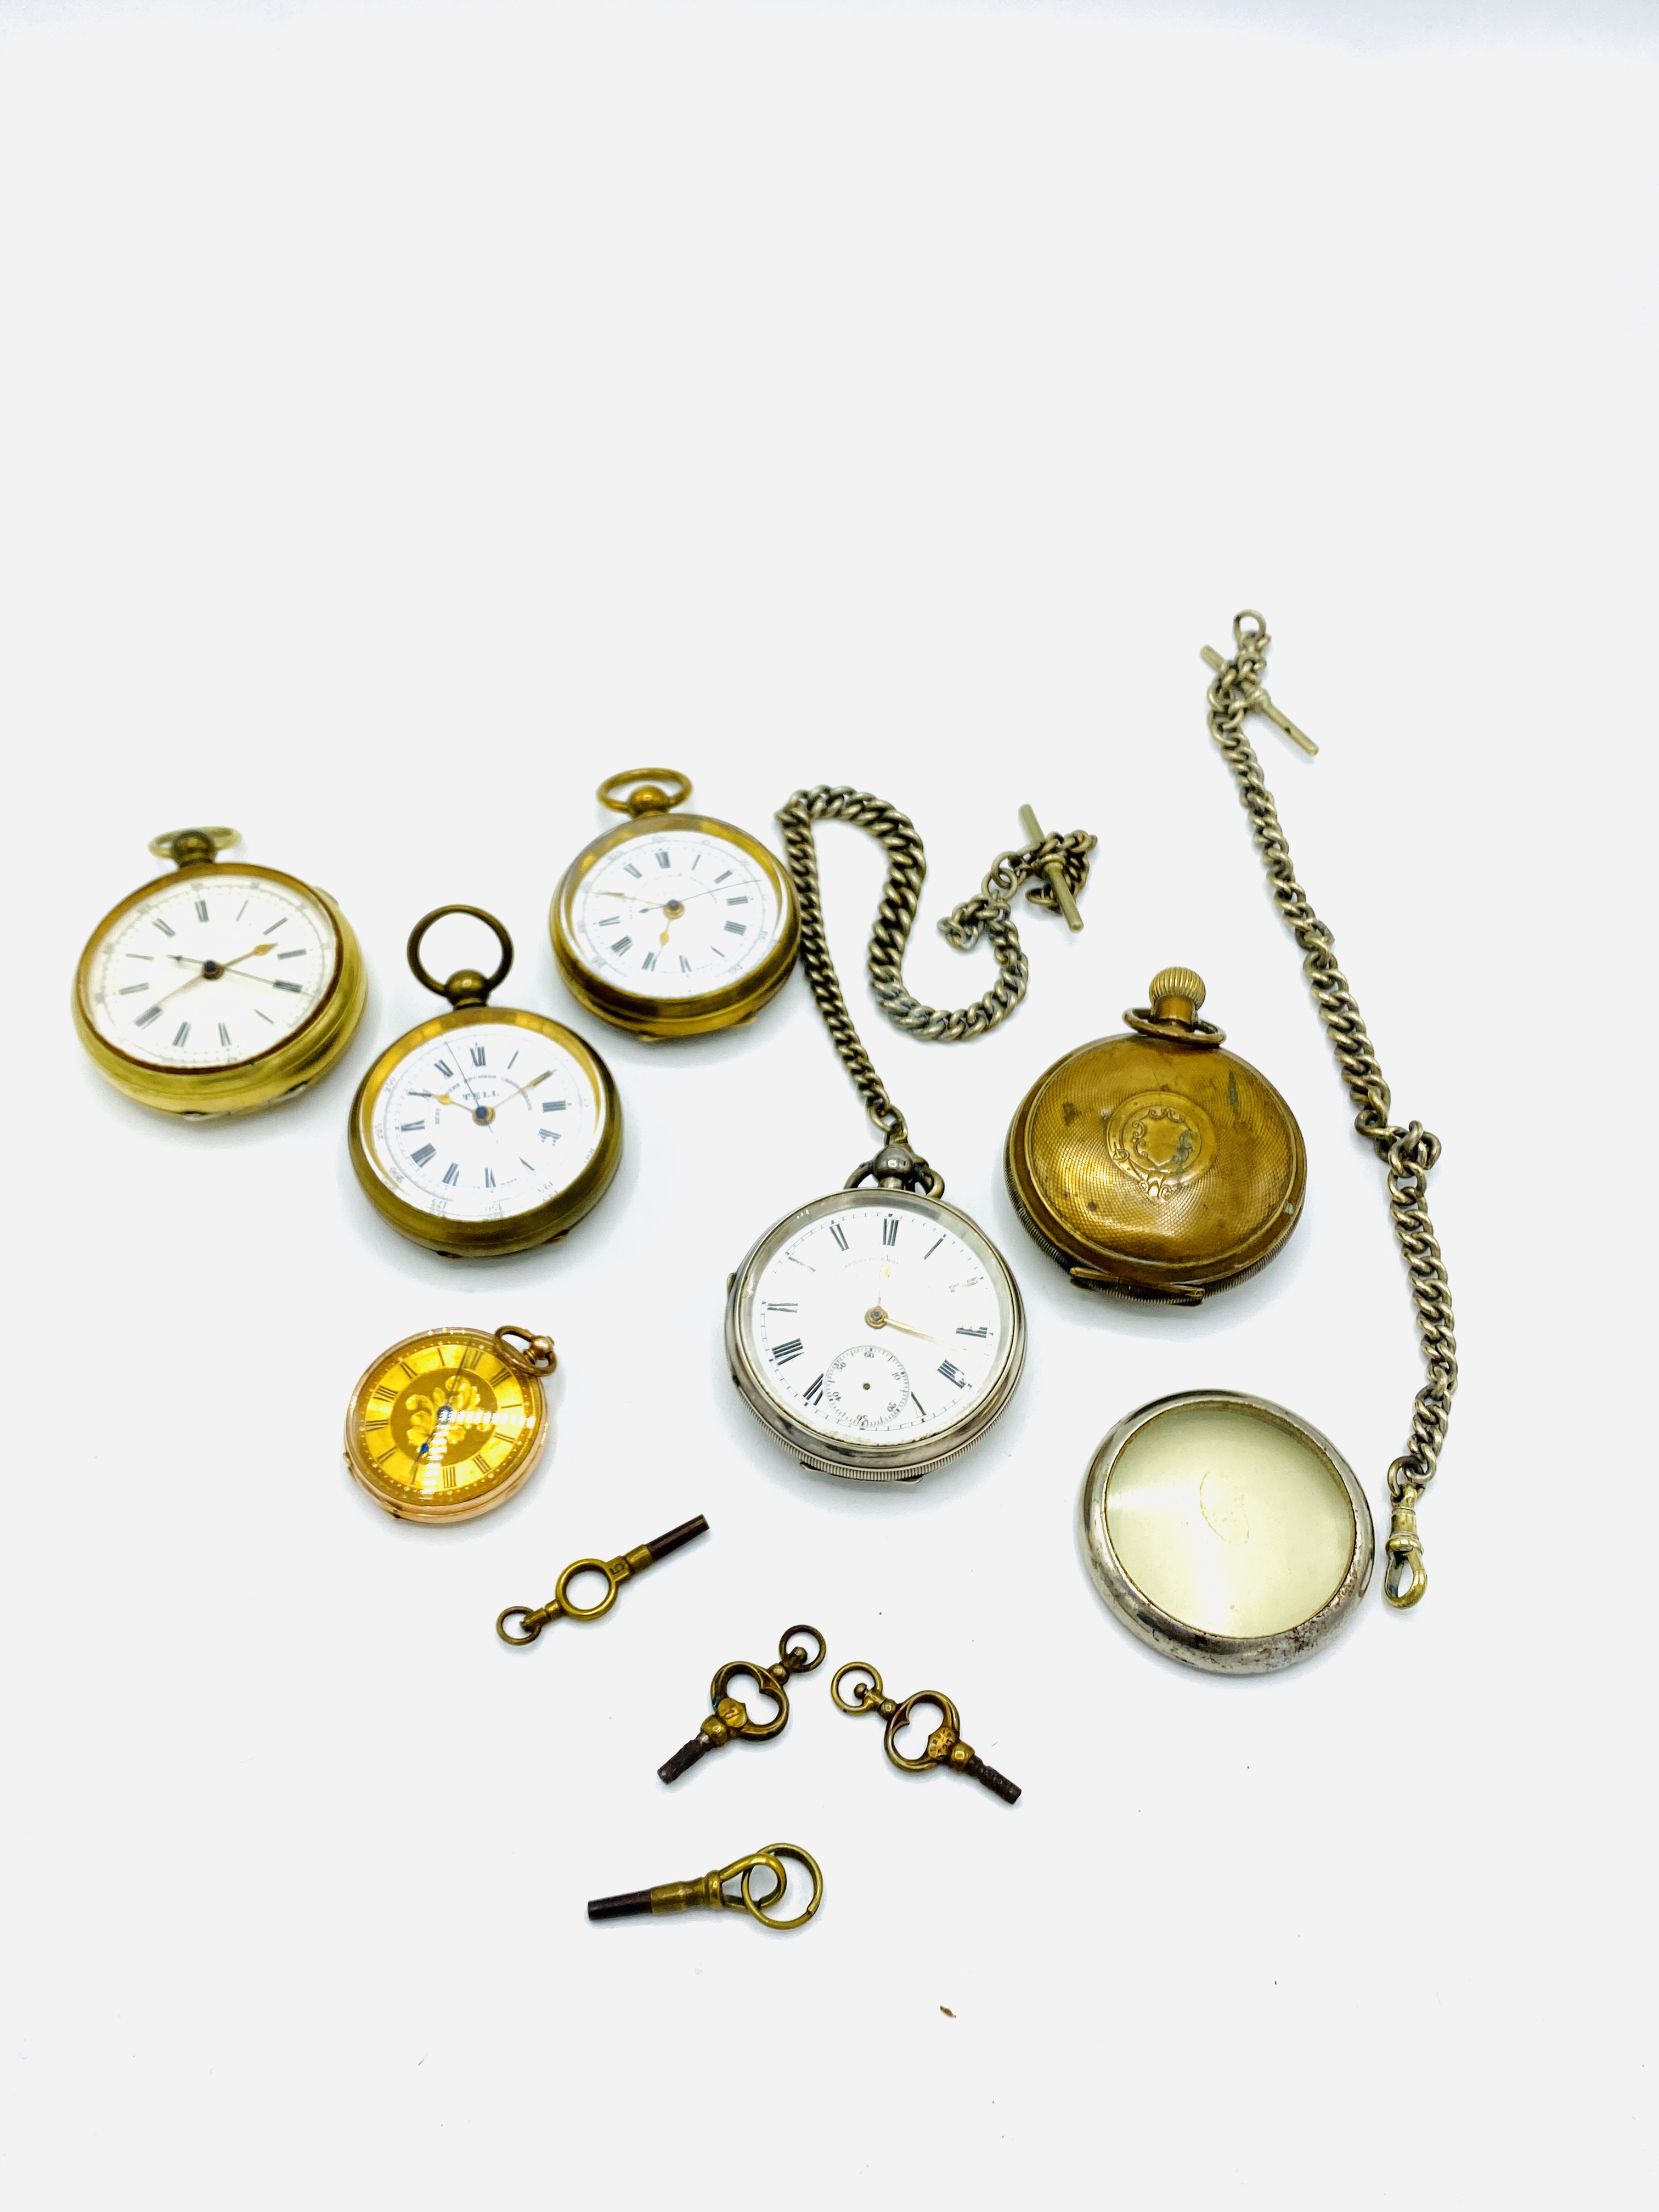 Collection of pocket watches, including gold and silver cased